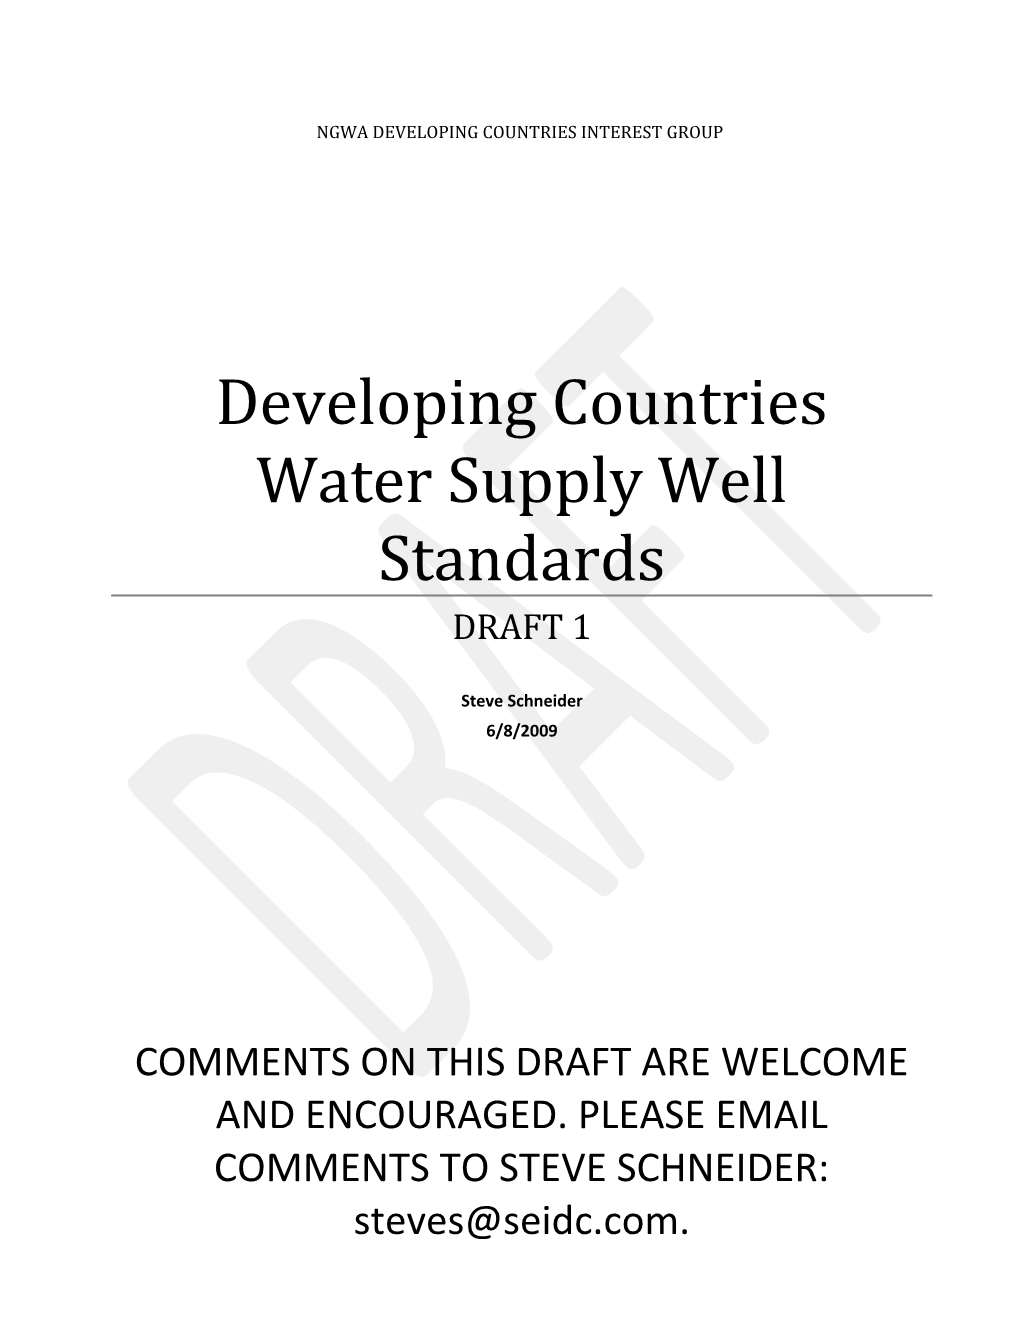 Developing Countries Water Supply Well Standards